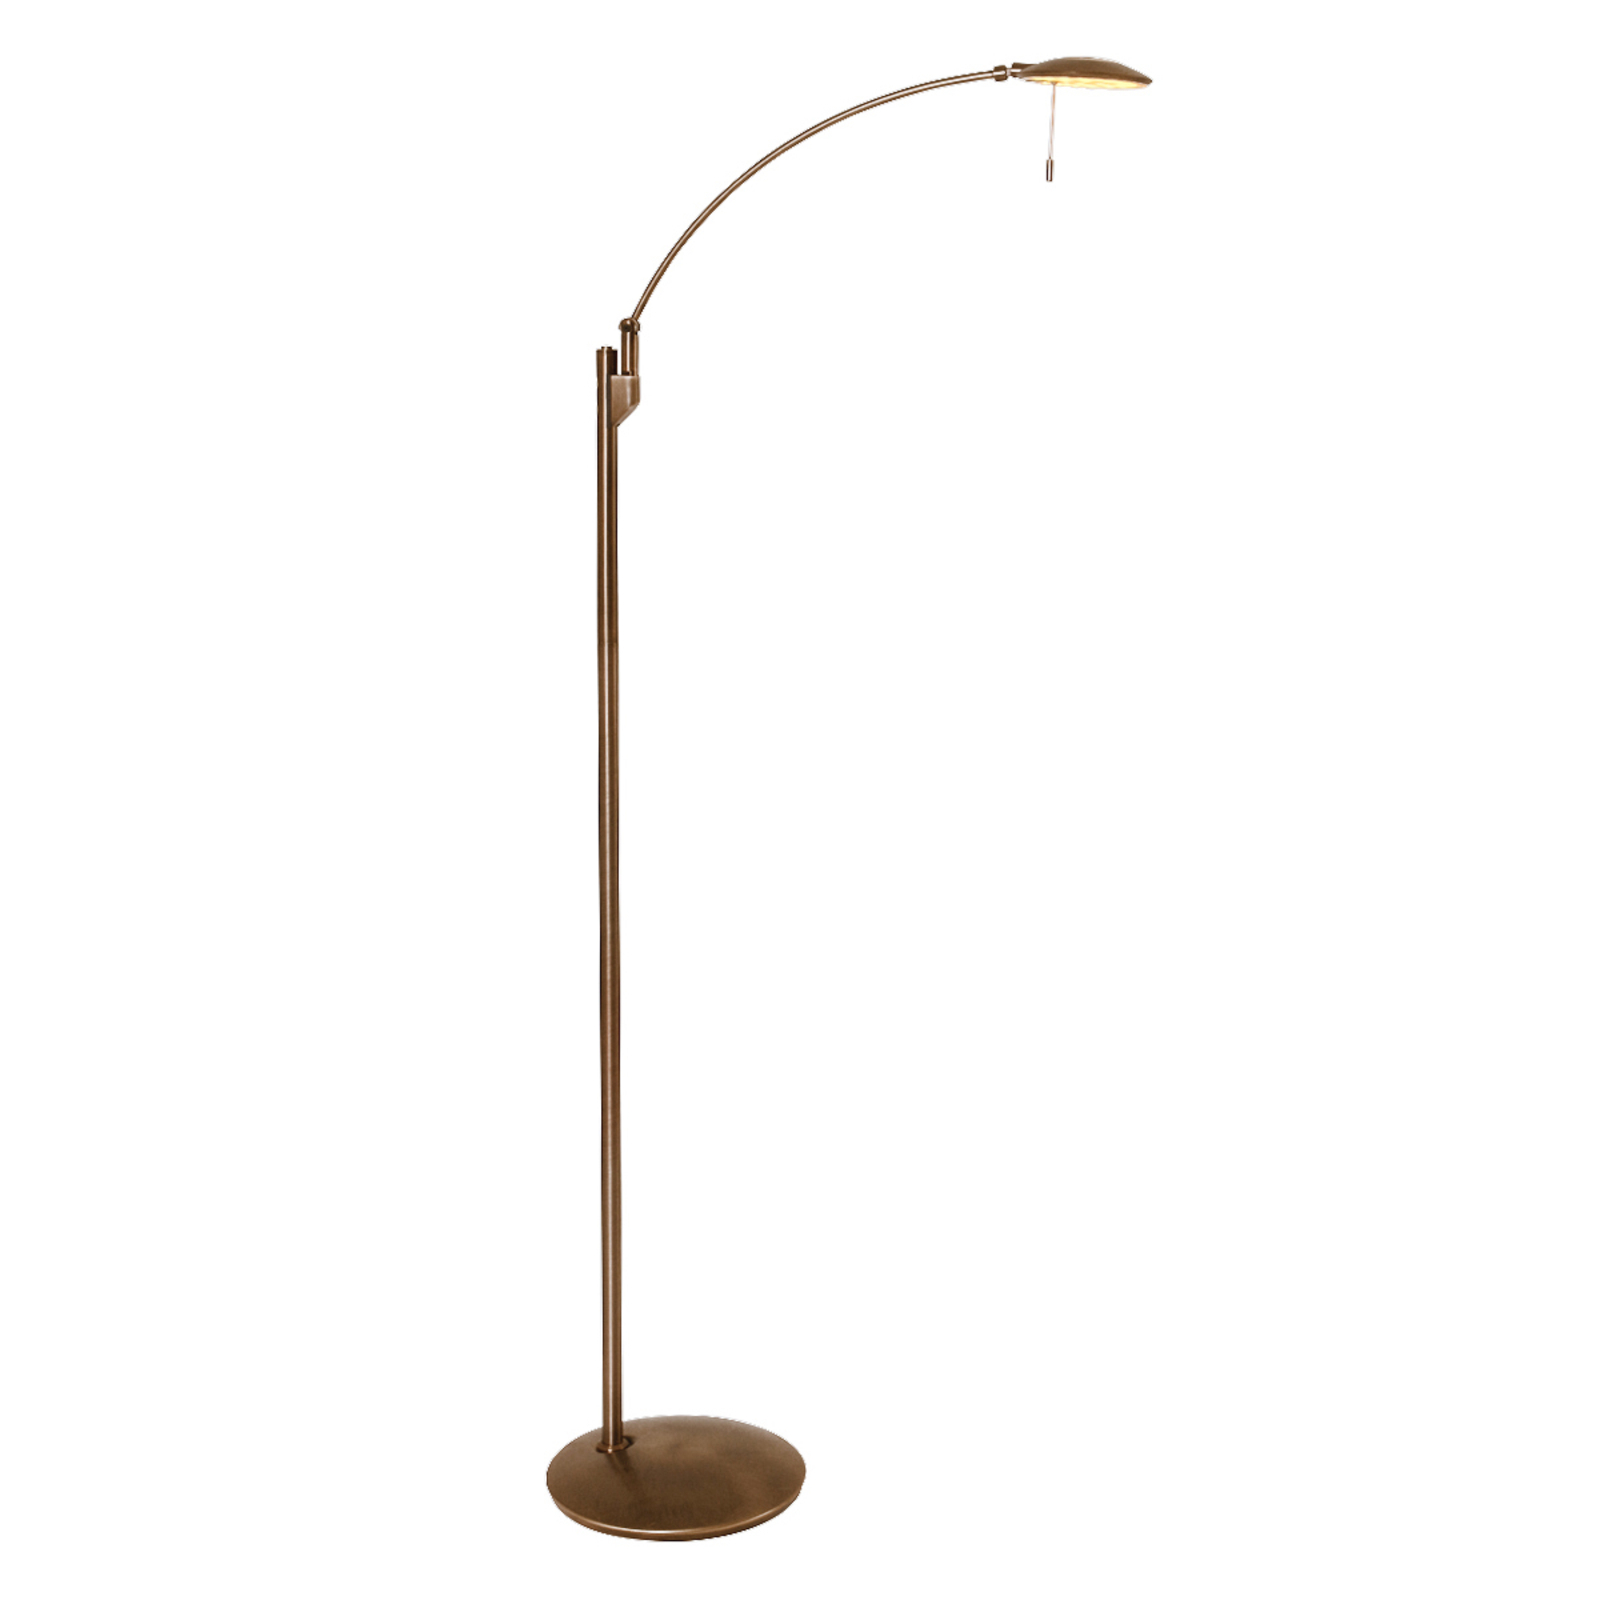 Dimmable Adjustable Led Floor Lamp, Best Dimmable Led Floor Lamp